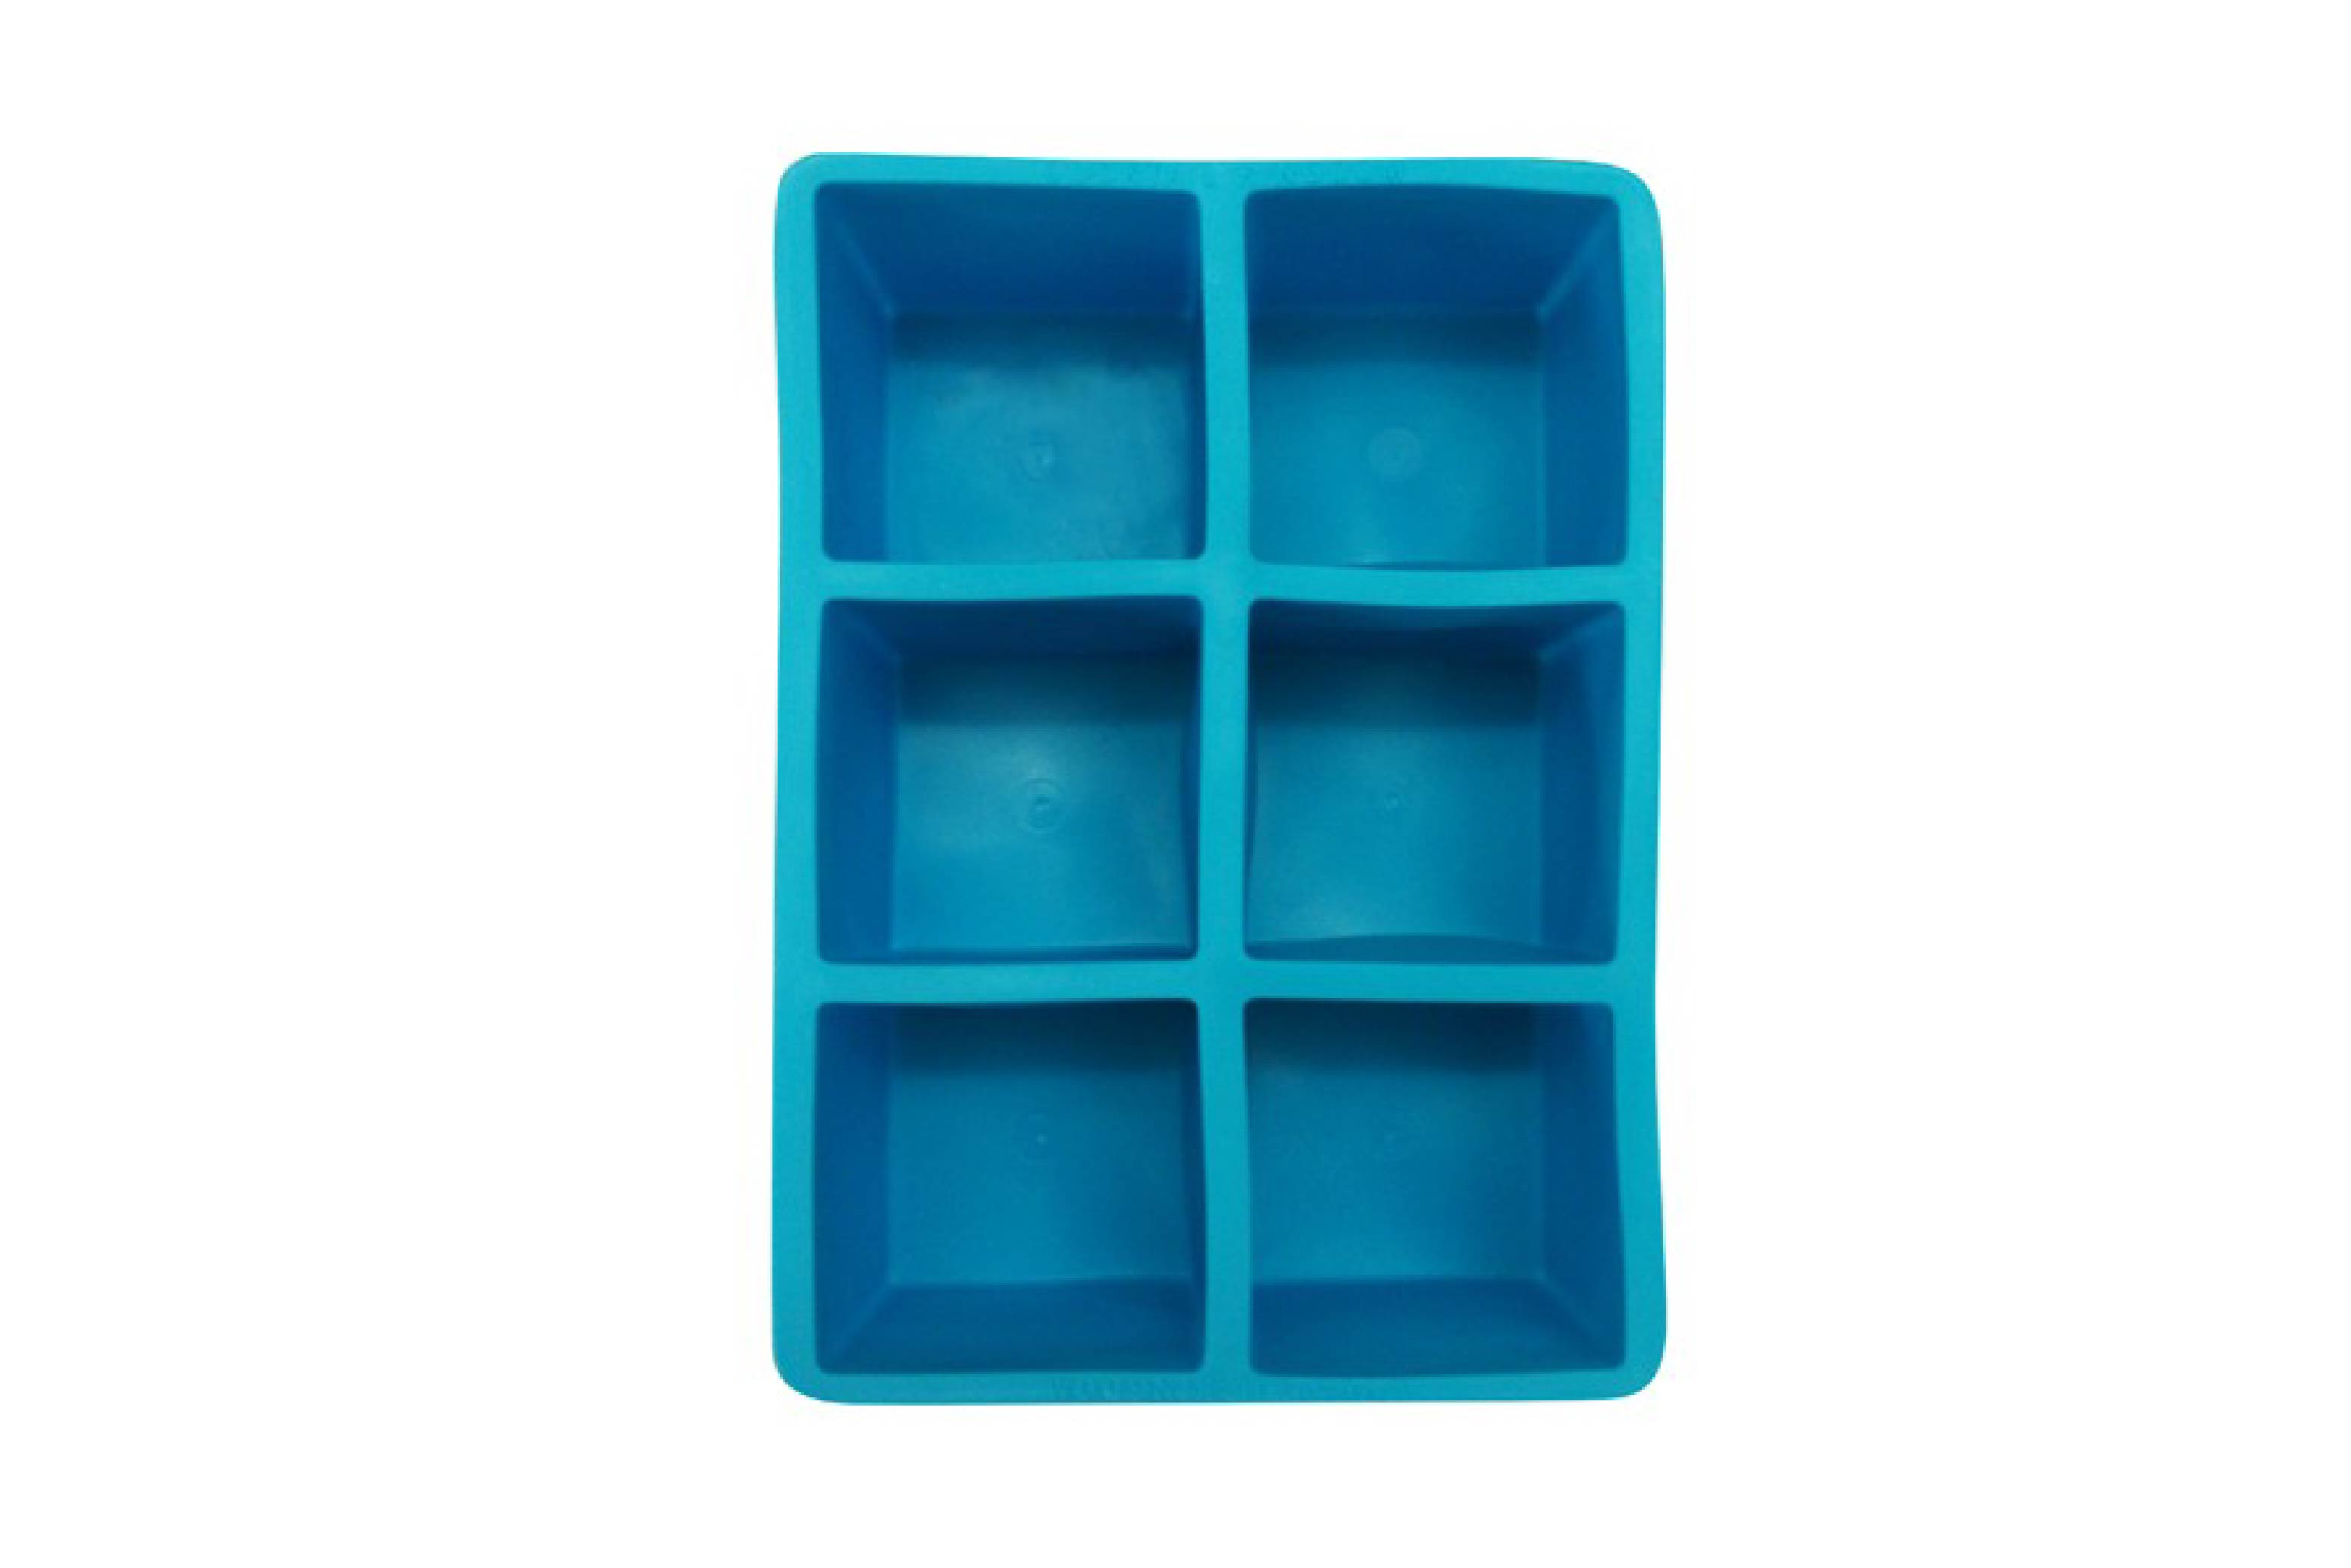 Blue ice cube square tray, ice mold, rubber ice cube tray, bartenders, mixology, mixologist, drinks, craft cocktails, special ice, drinks cabinet, professional bartending, cocktail paraphernalia